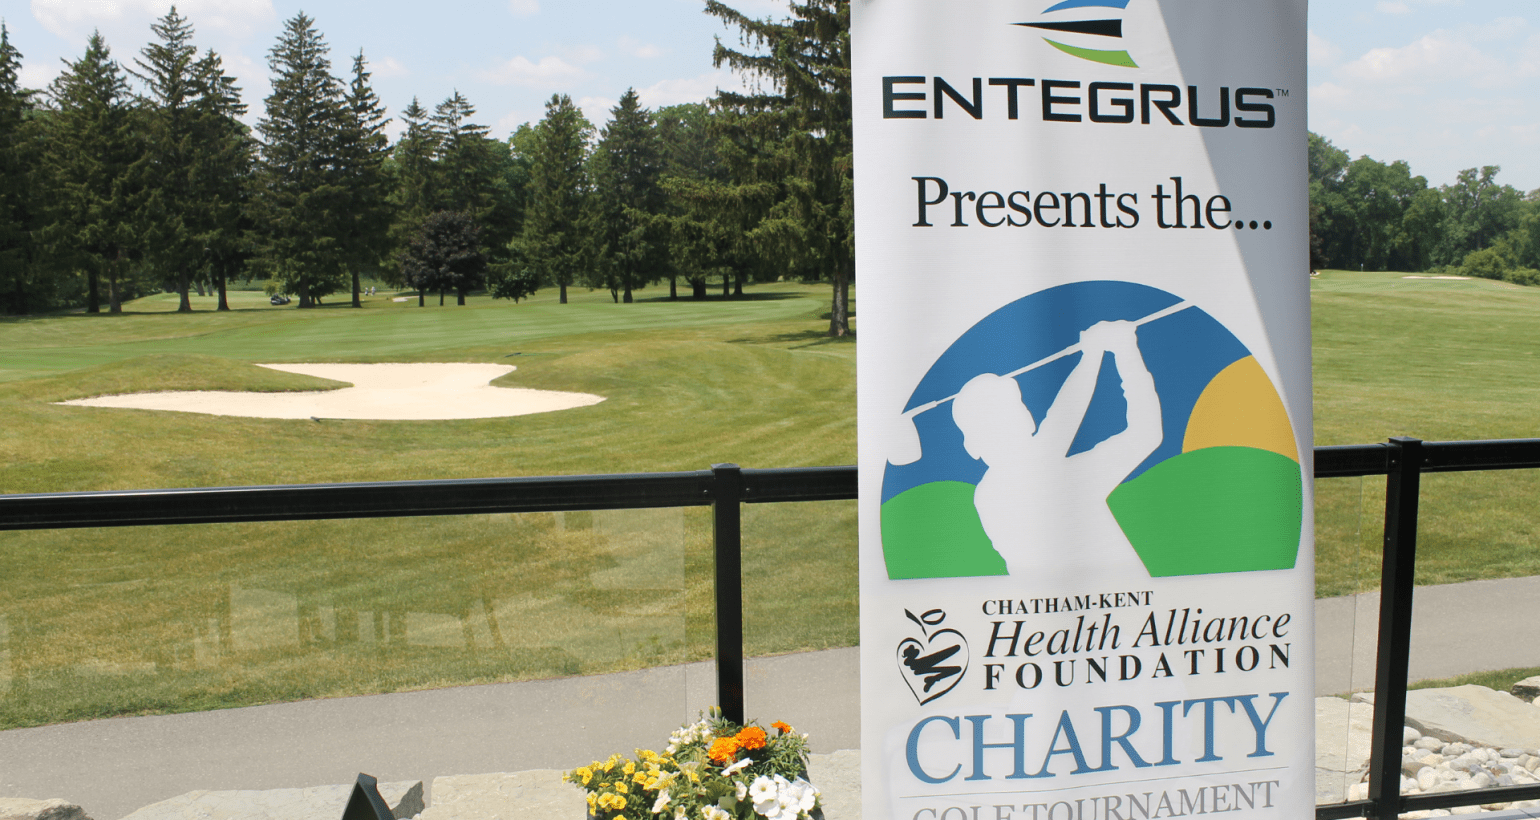 Foundation’s Golf Tournament raises $131,245 in support of hospital surgical equipment